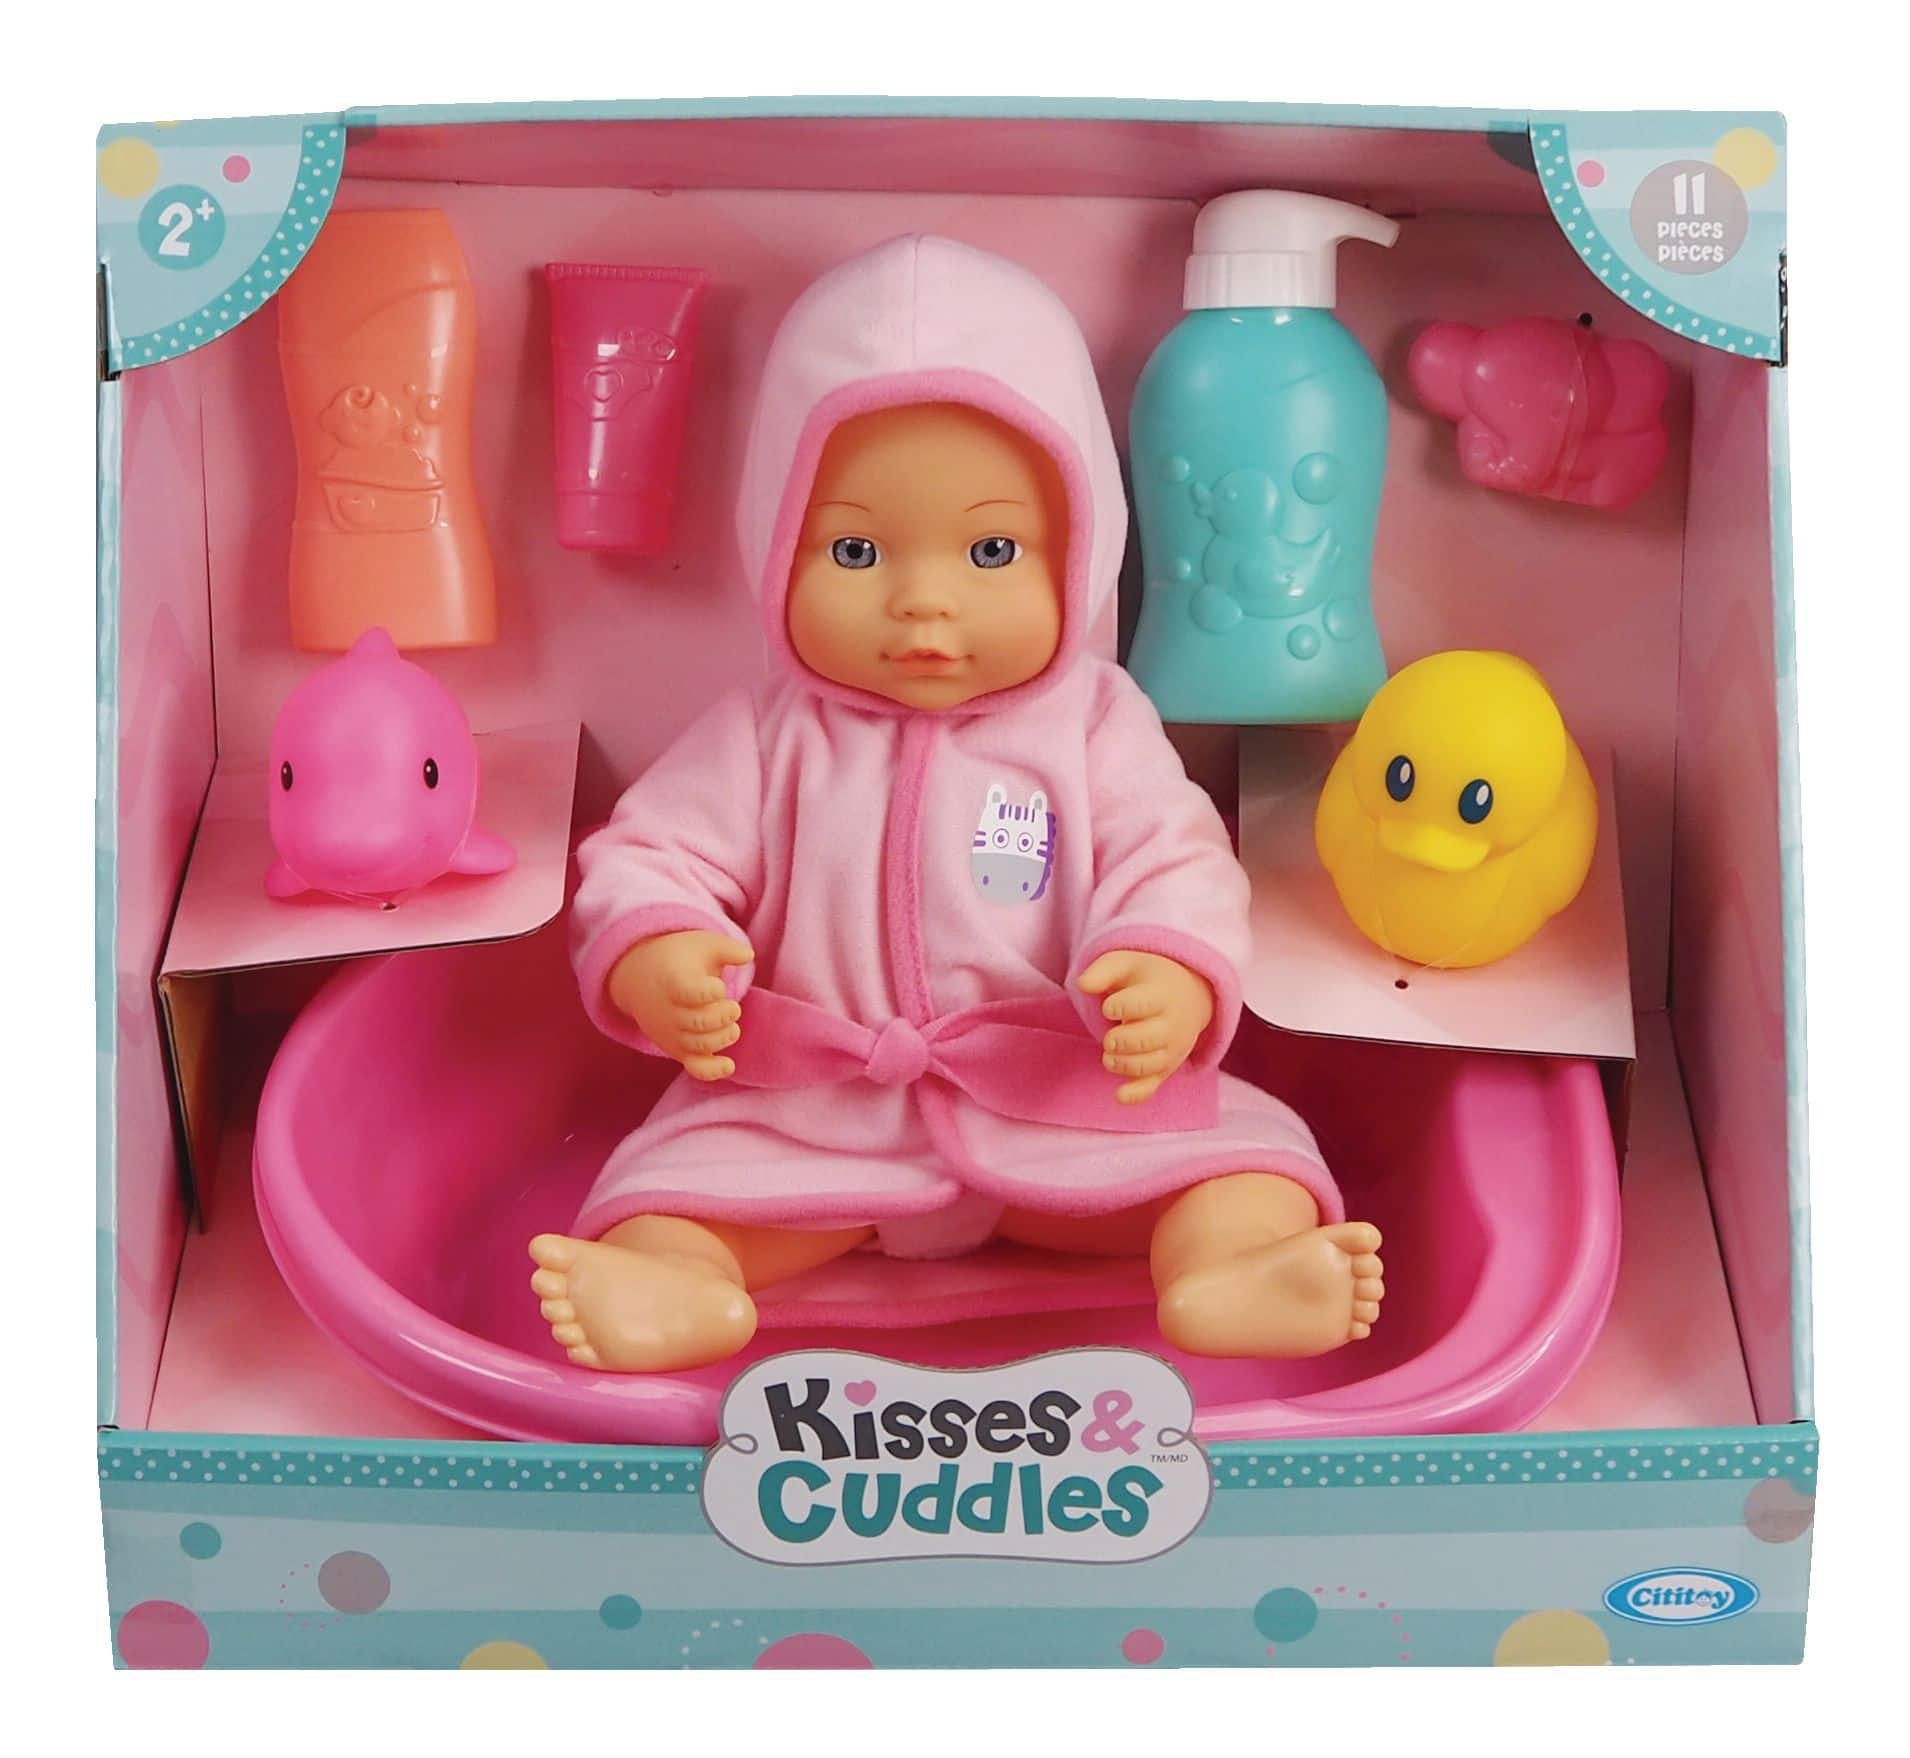 Kisses & Cuddles Baby Doll Toy w/Bathtub & Accessories, 12-in, Ages 2+